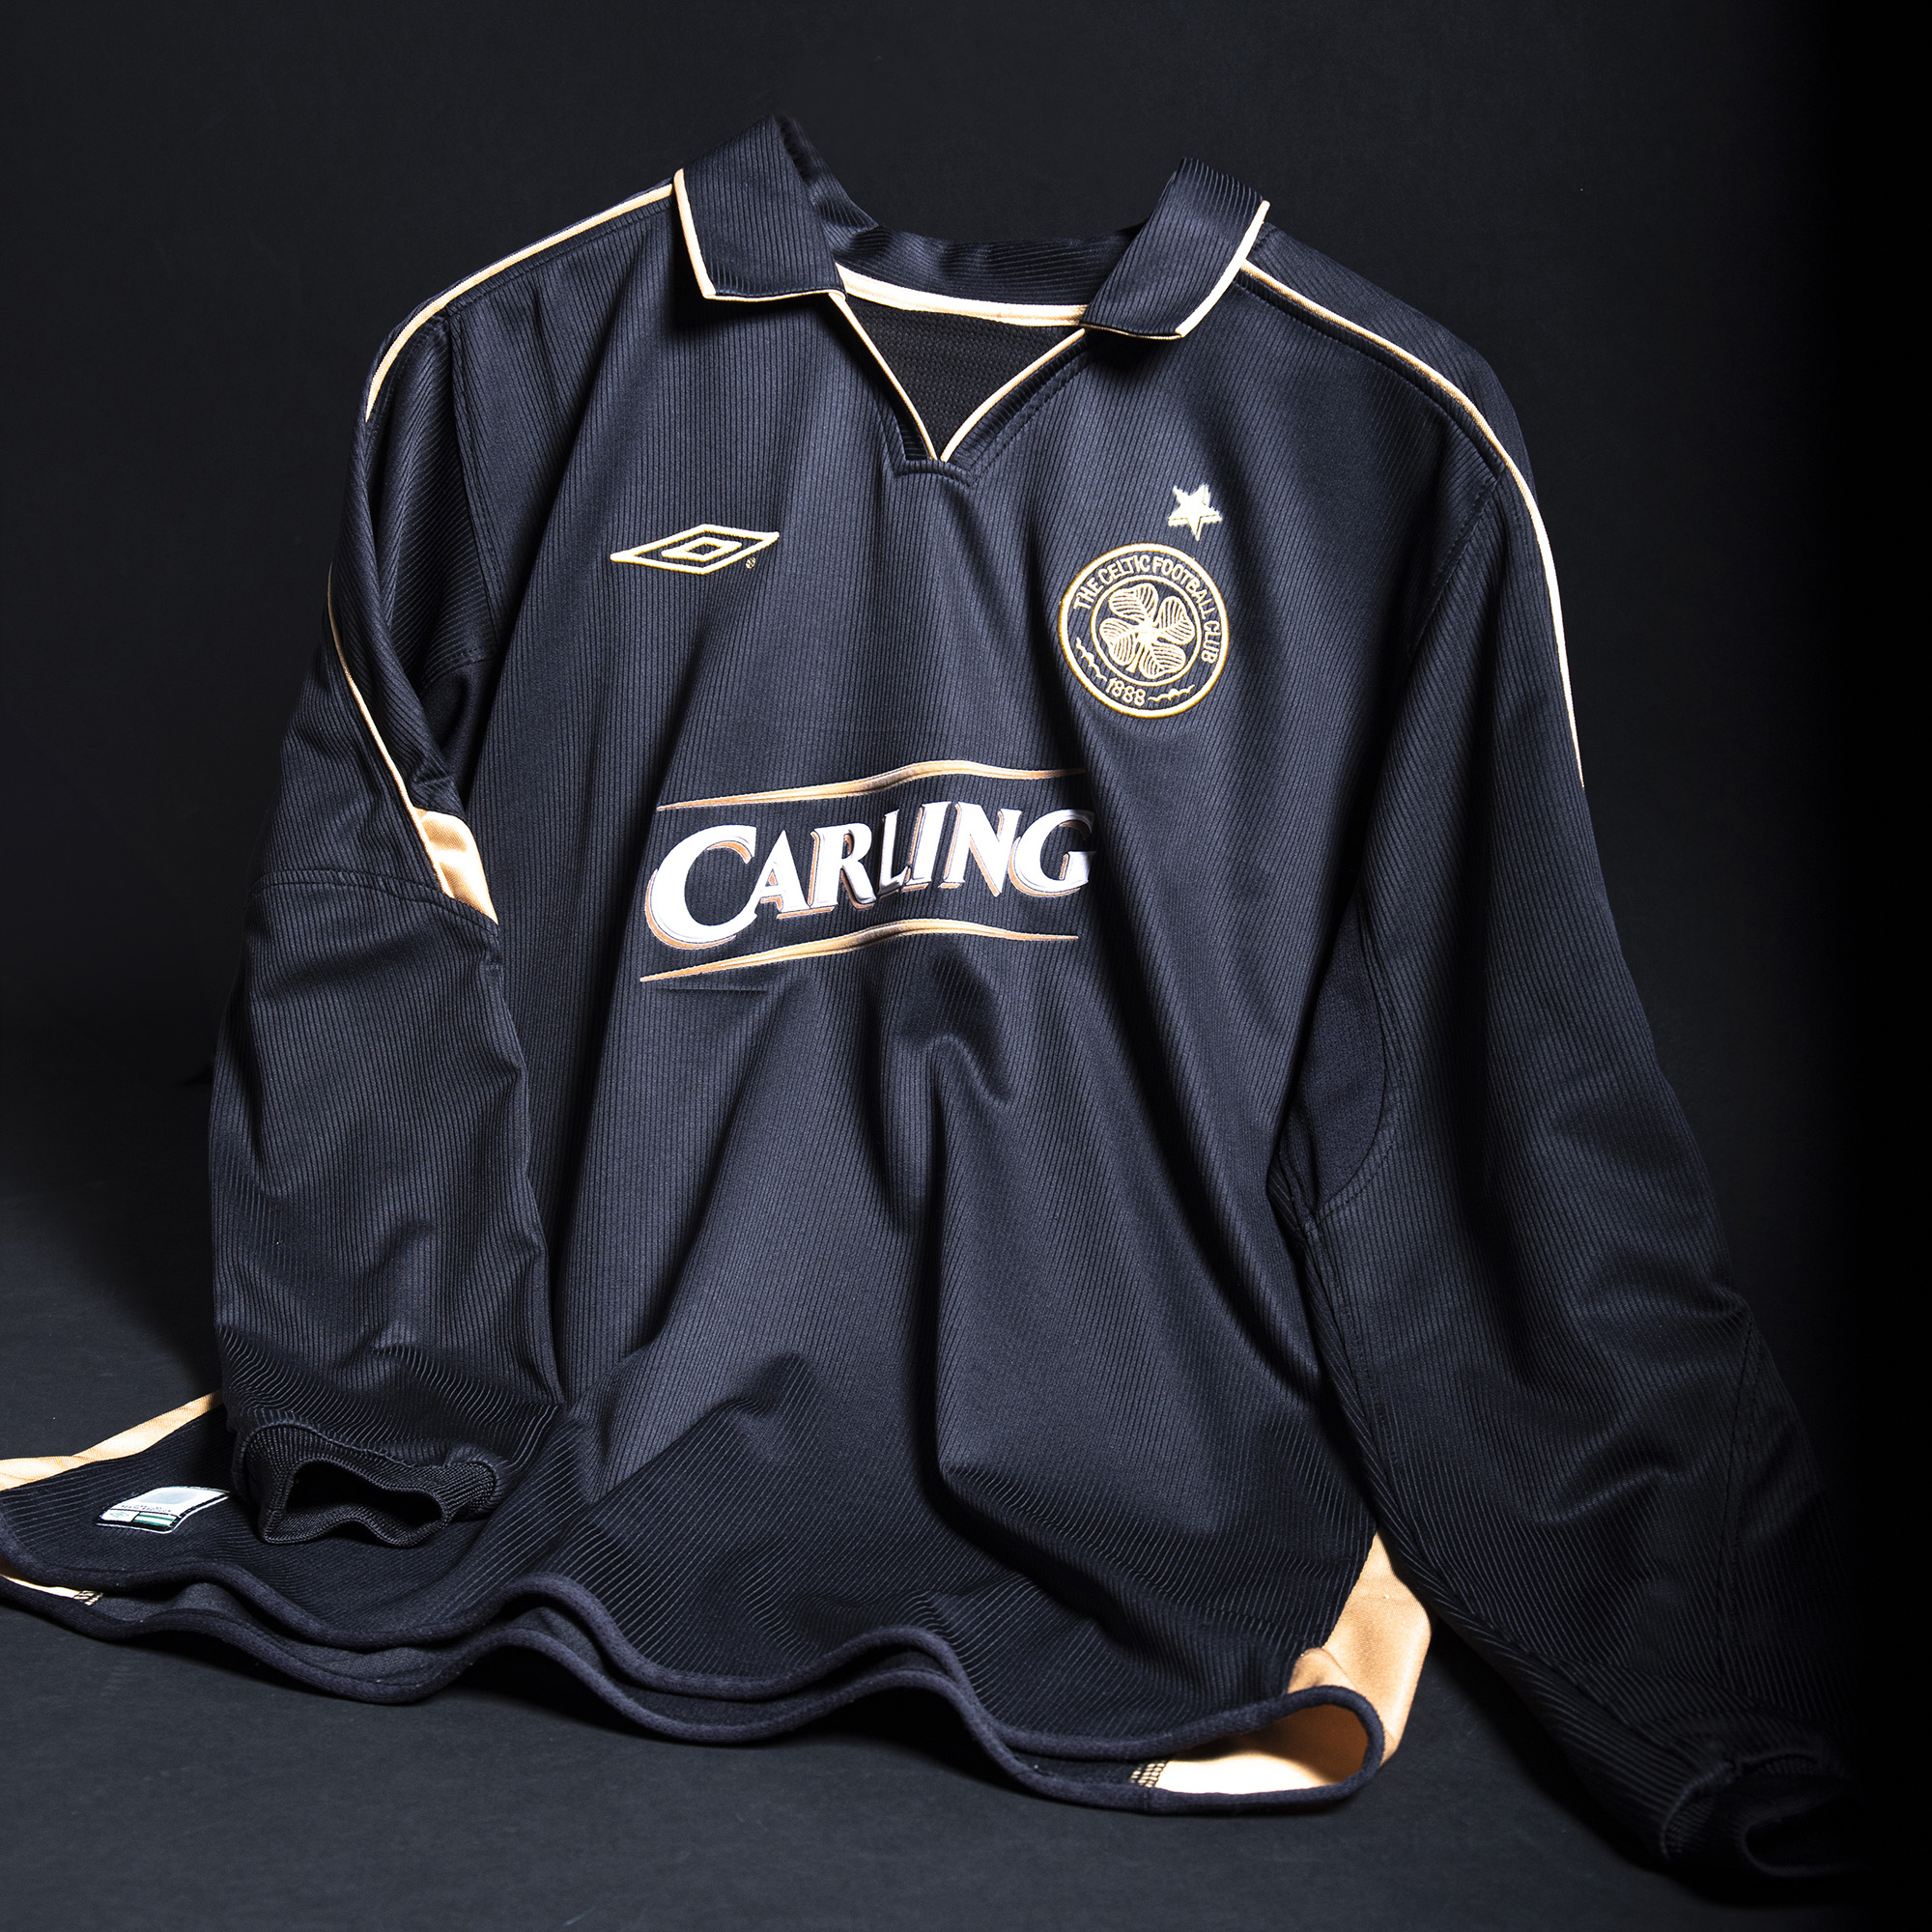 Classic Football Shirts on X: Celtic 2003 Away by Umbro  Larsson 🇸🇪  Black and gold. Long Sleeves. Henrik print. Hitting the site on Tuesday at  14:00 (UK Time) in a size